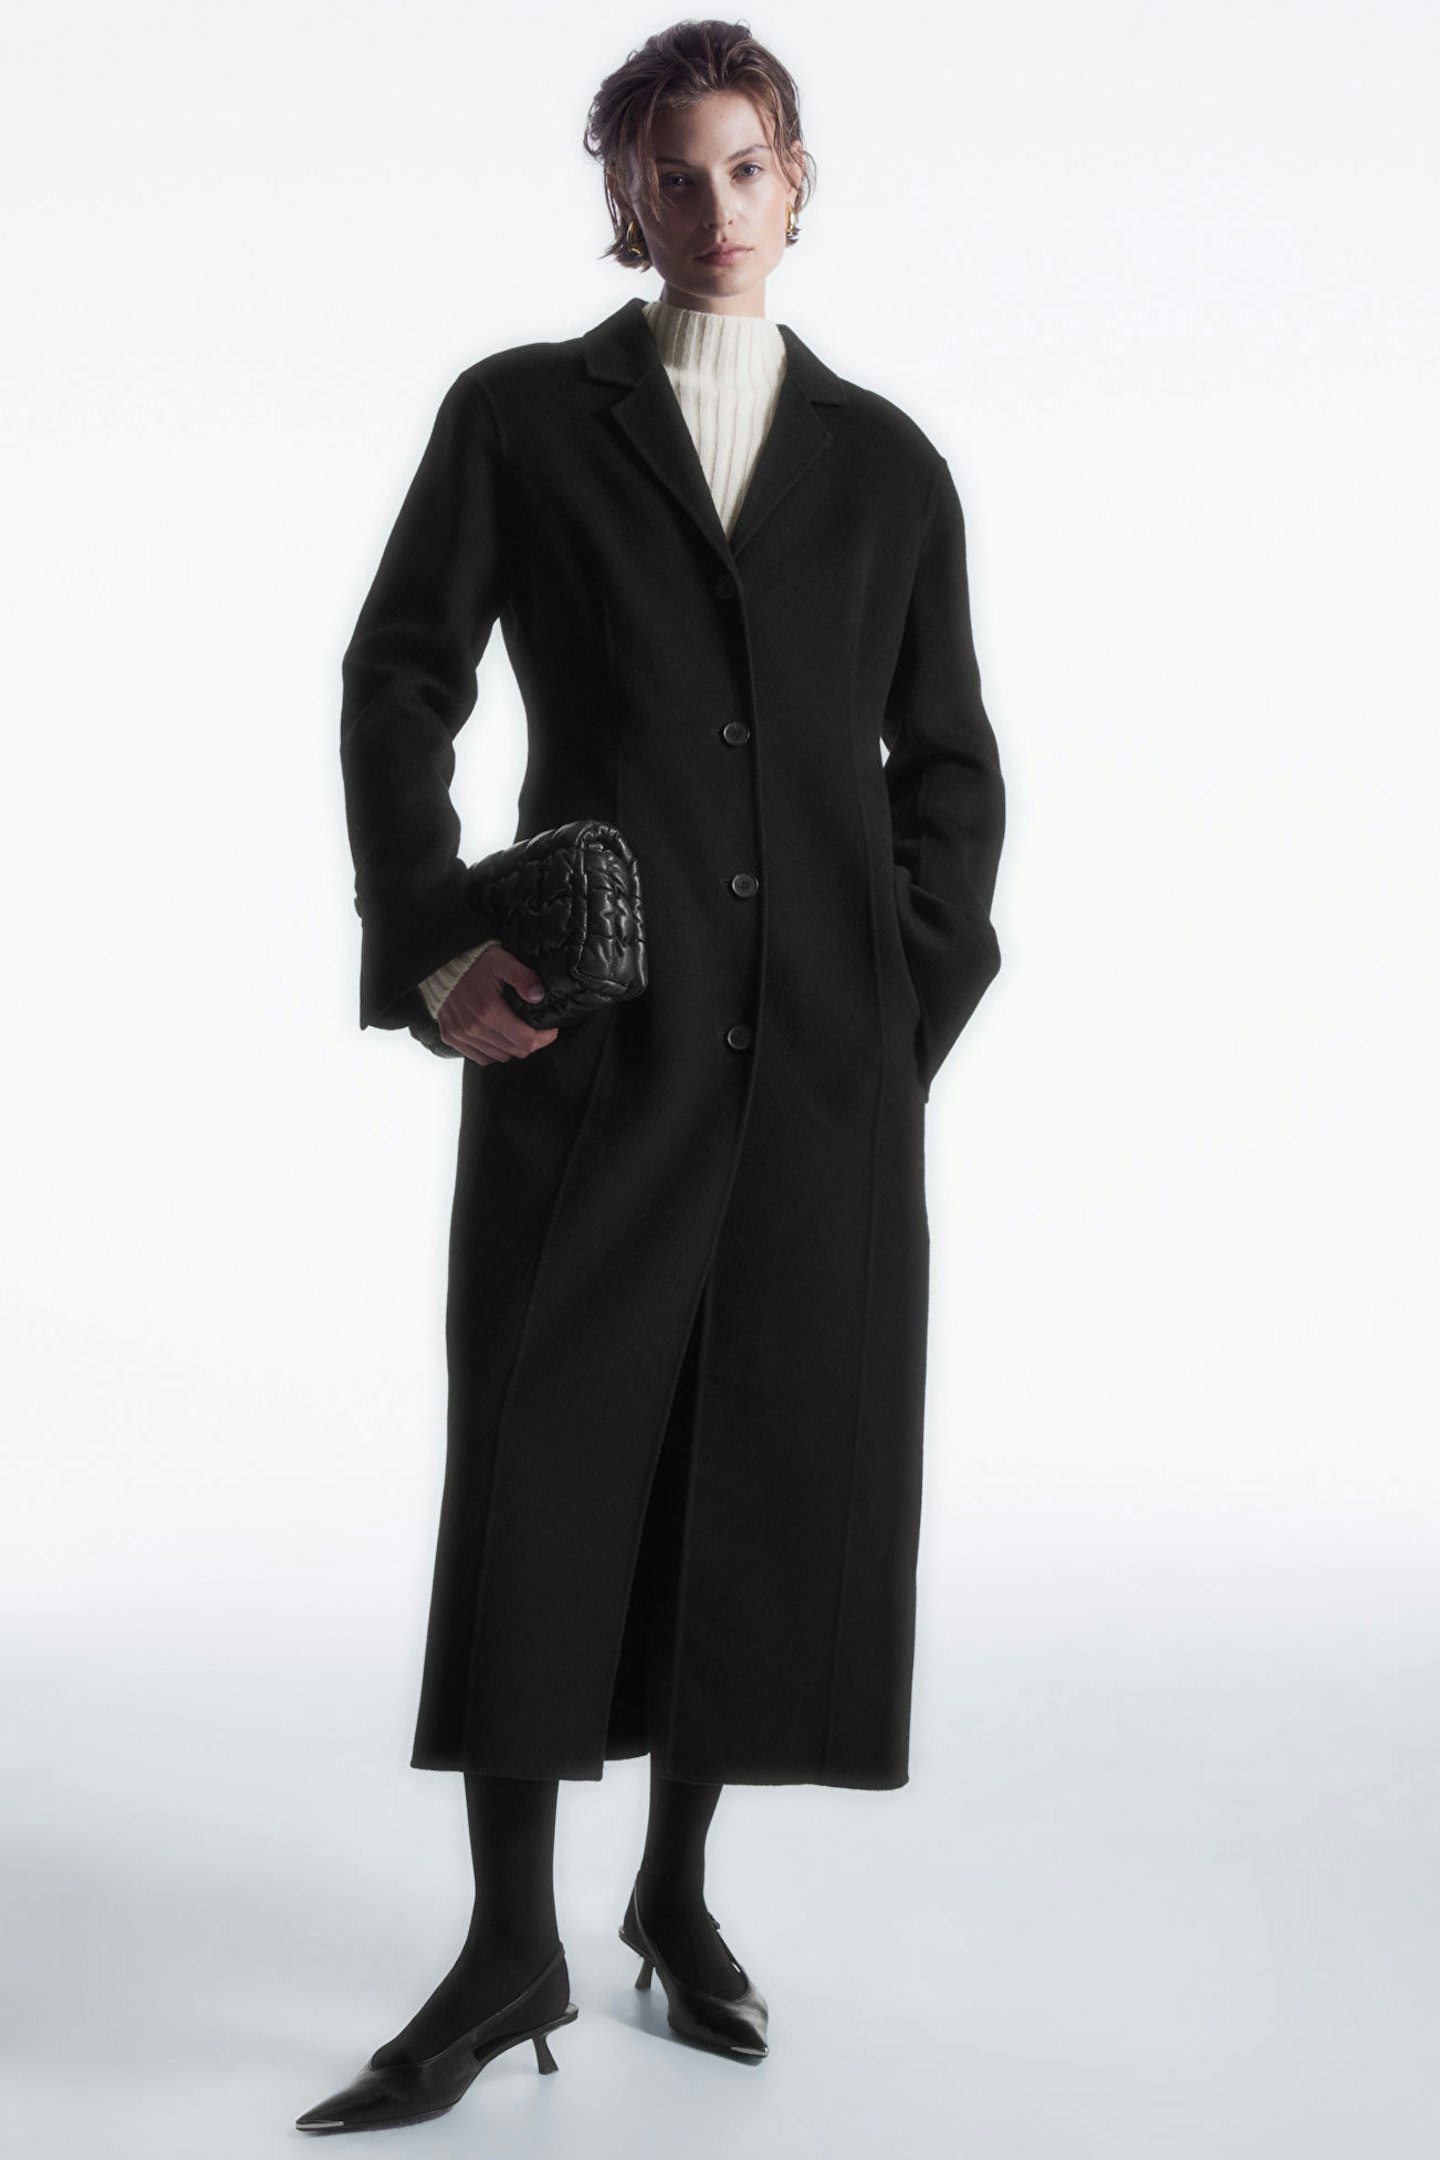 COS, Tailored Double-Faced Wool Coat